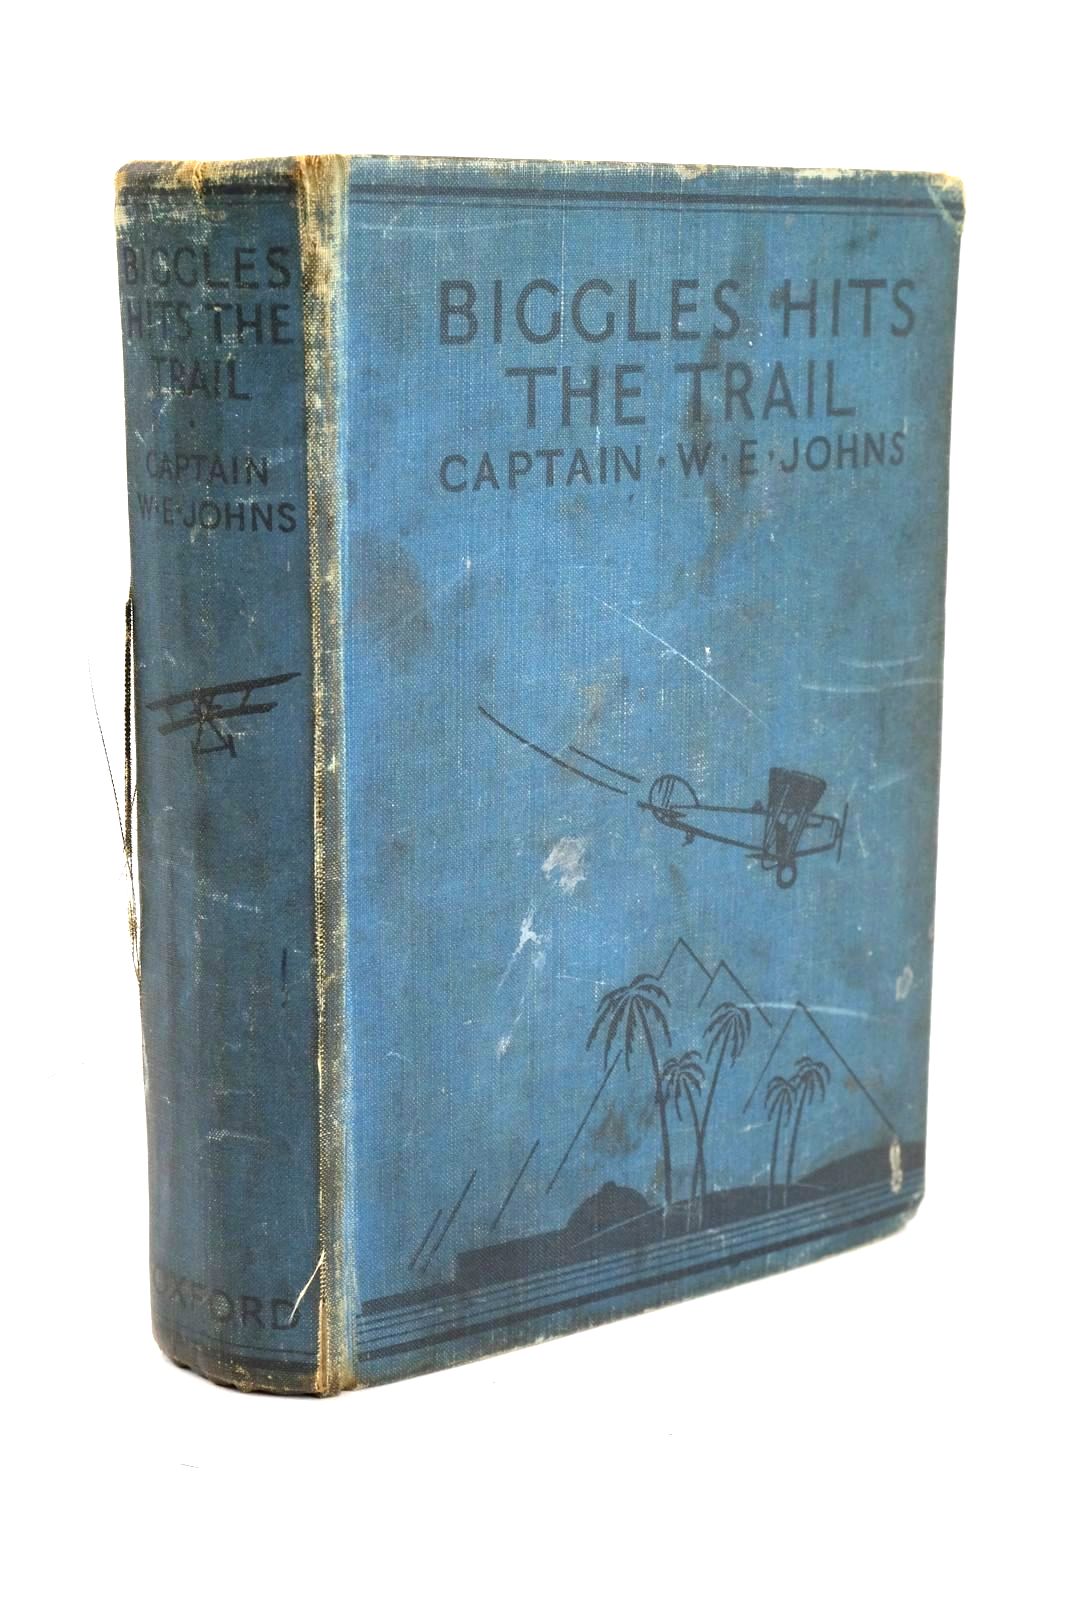 Photo of BIGGLES HITS THE TRAIL written by Johns, W.E. illustrated by Leigh, Howard Sindall, Alfred published by Oxford University Press, Humphrey Milford (STOCK CODE: 1326369)  for sale by Stella & Rose's Books